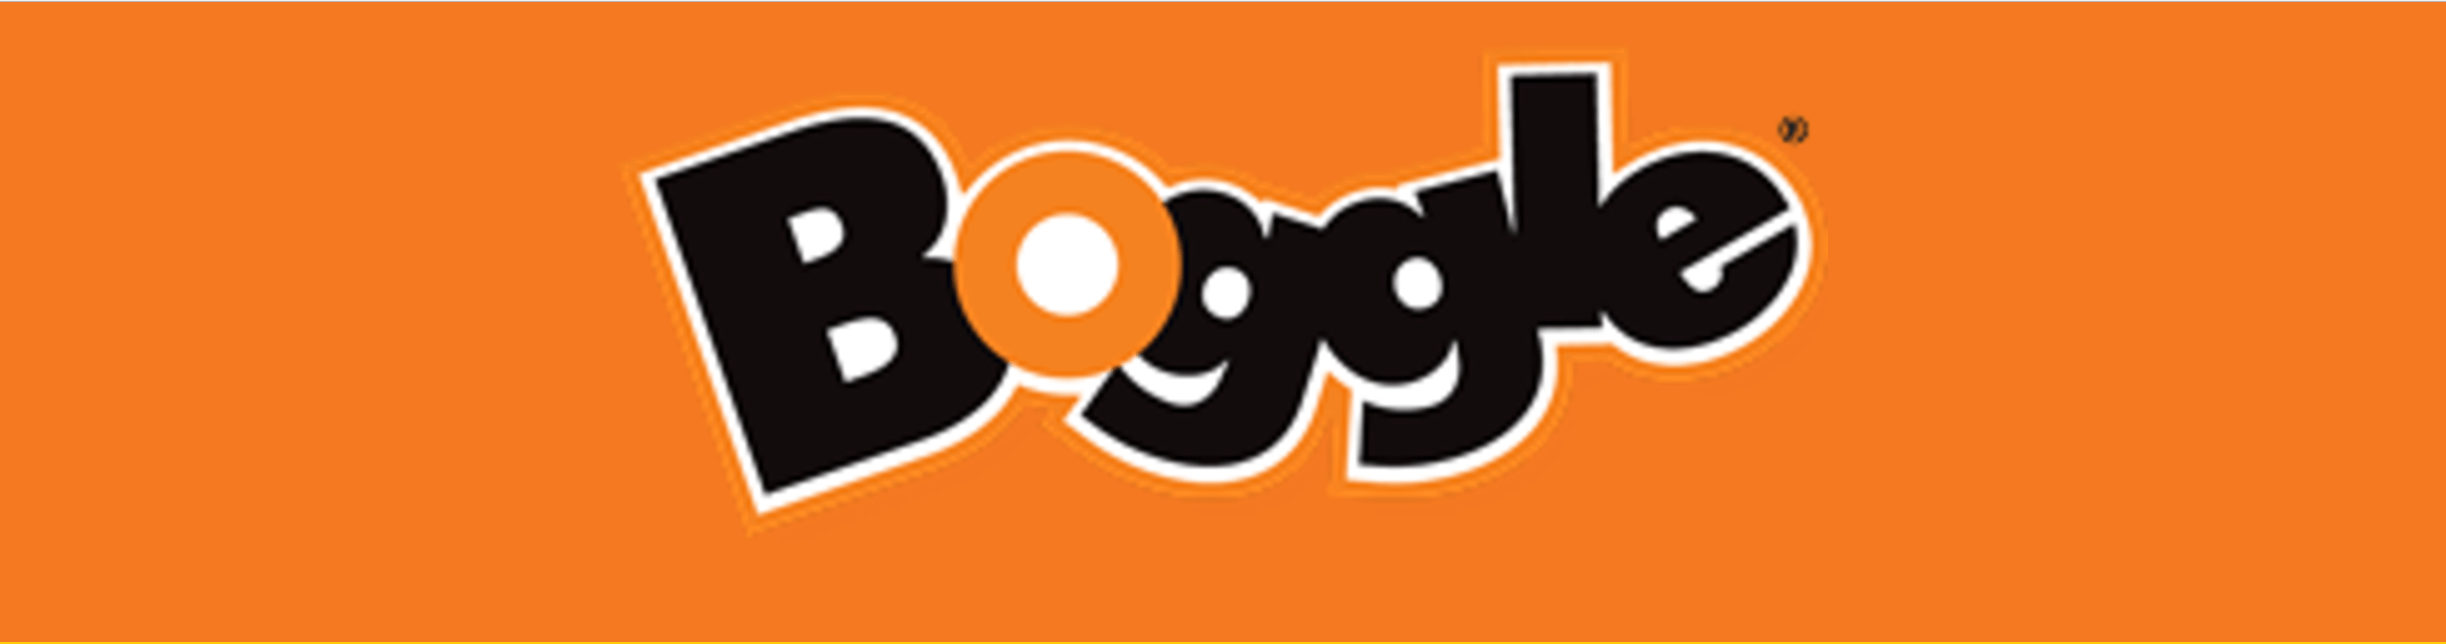 Boggle Logo - Creating a Boggle Game using React: Part 1